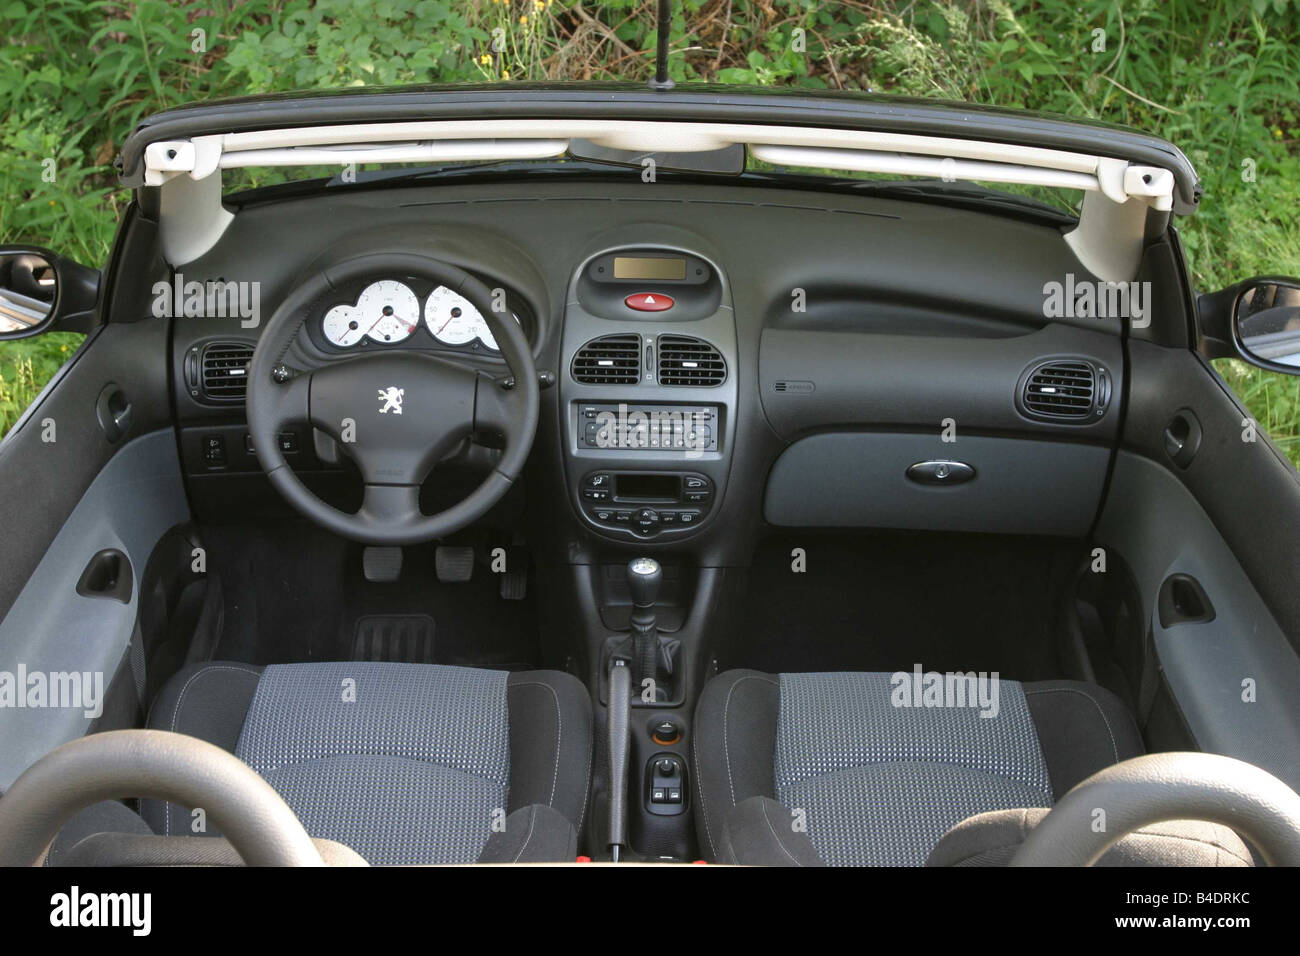 Car, Peugeot 206 CC, Convertible, model year 2000-, black, open top, country road, interior view, Interior view, Cockpit, techni Stock Photo